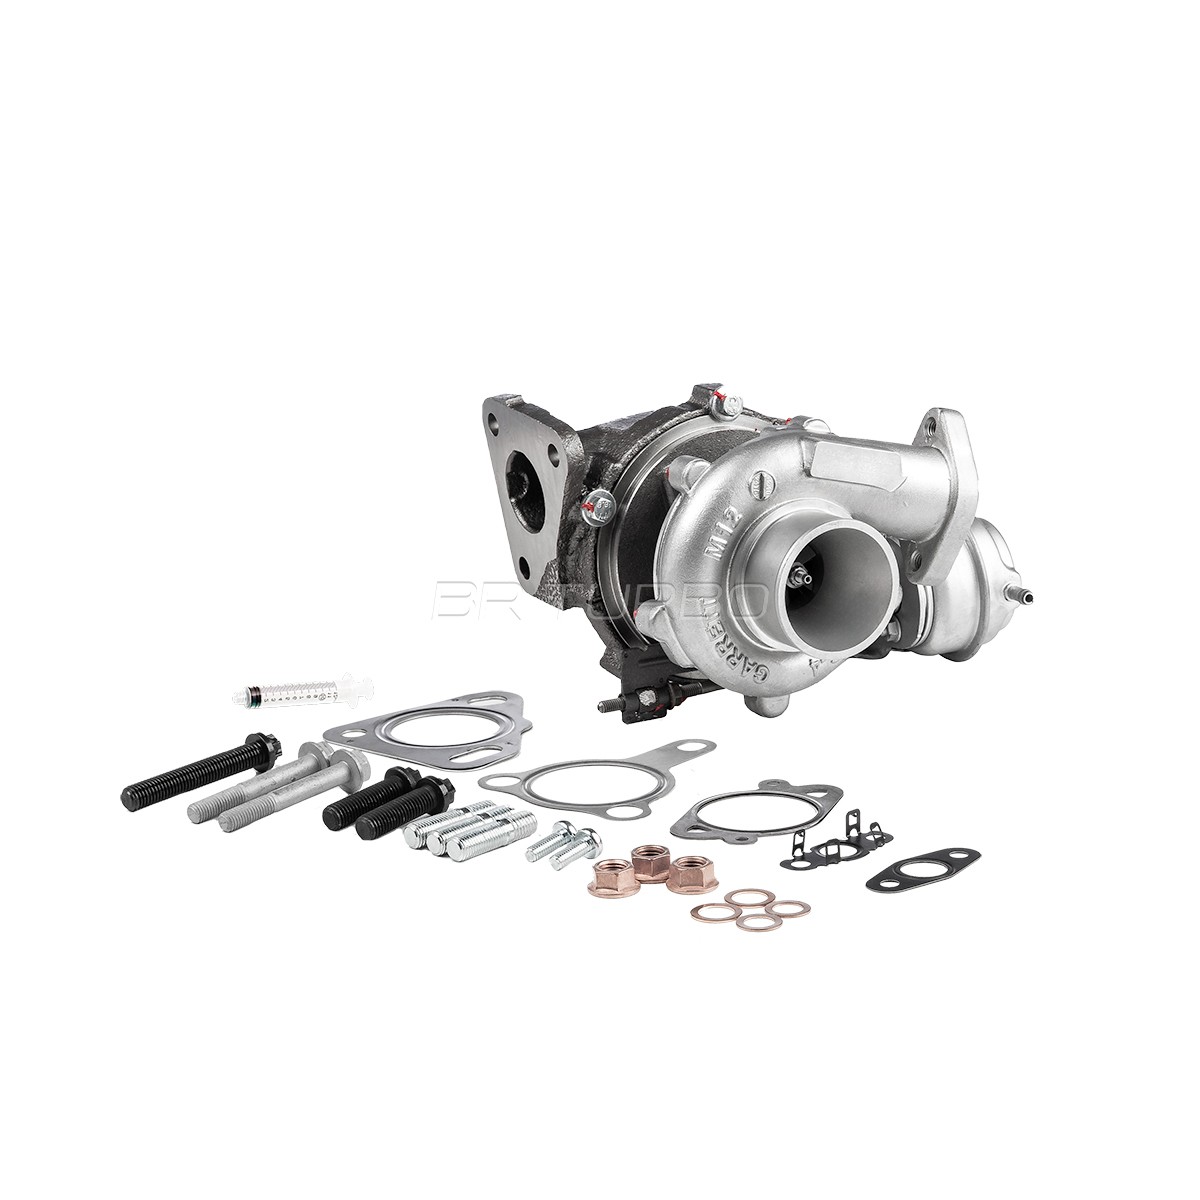 7795915001RSM Turbocharger REMANUFACTURED TURBOCHARGER WITH MOUNTING KIT BR Turbo 779591-5001RSM review and test